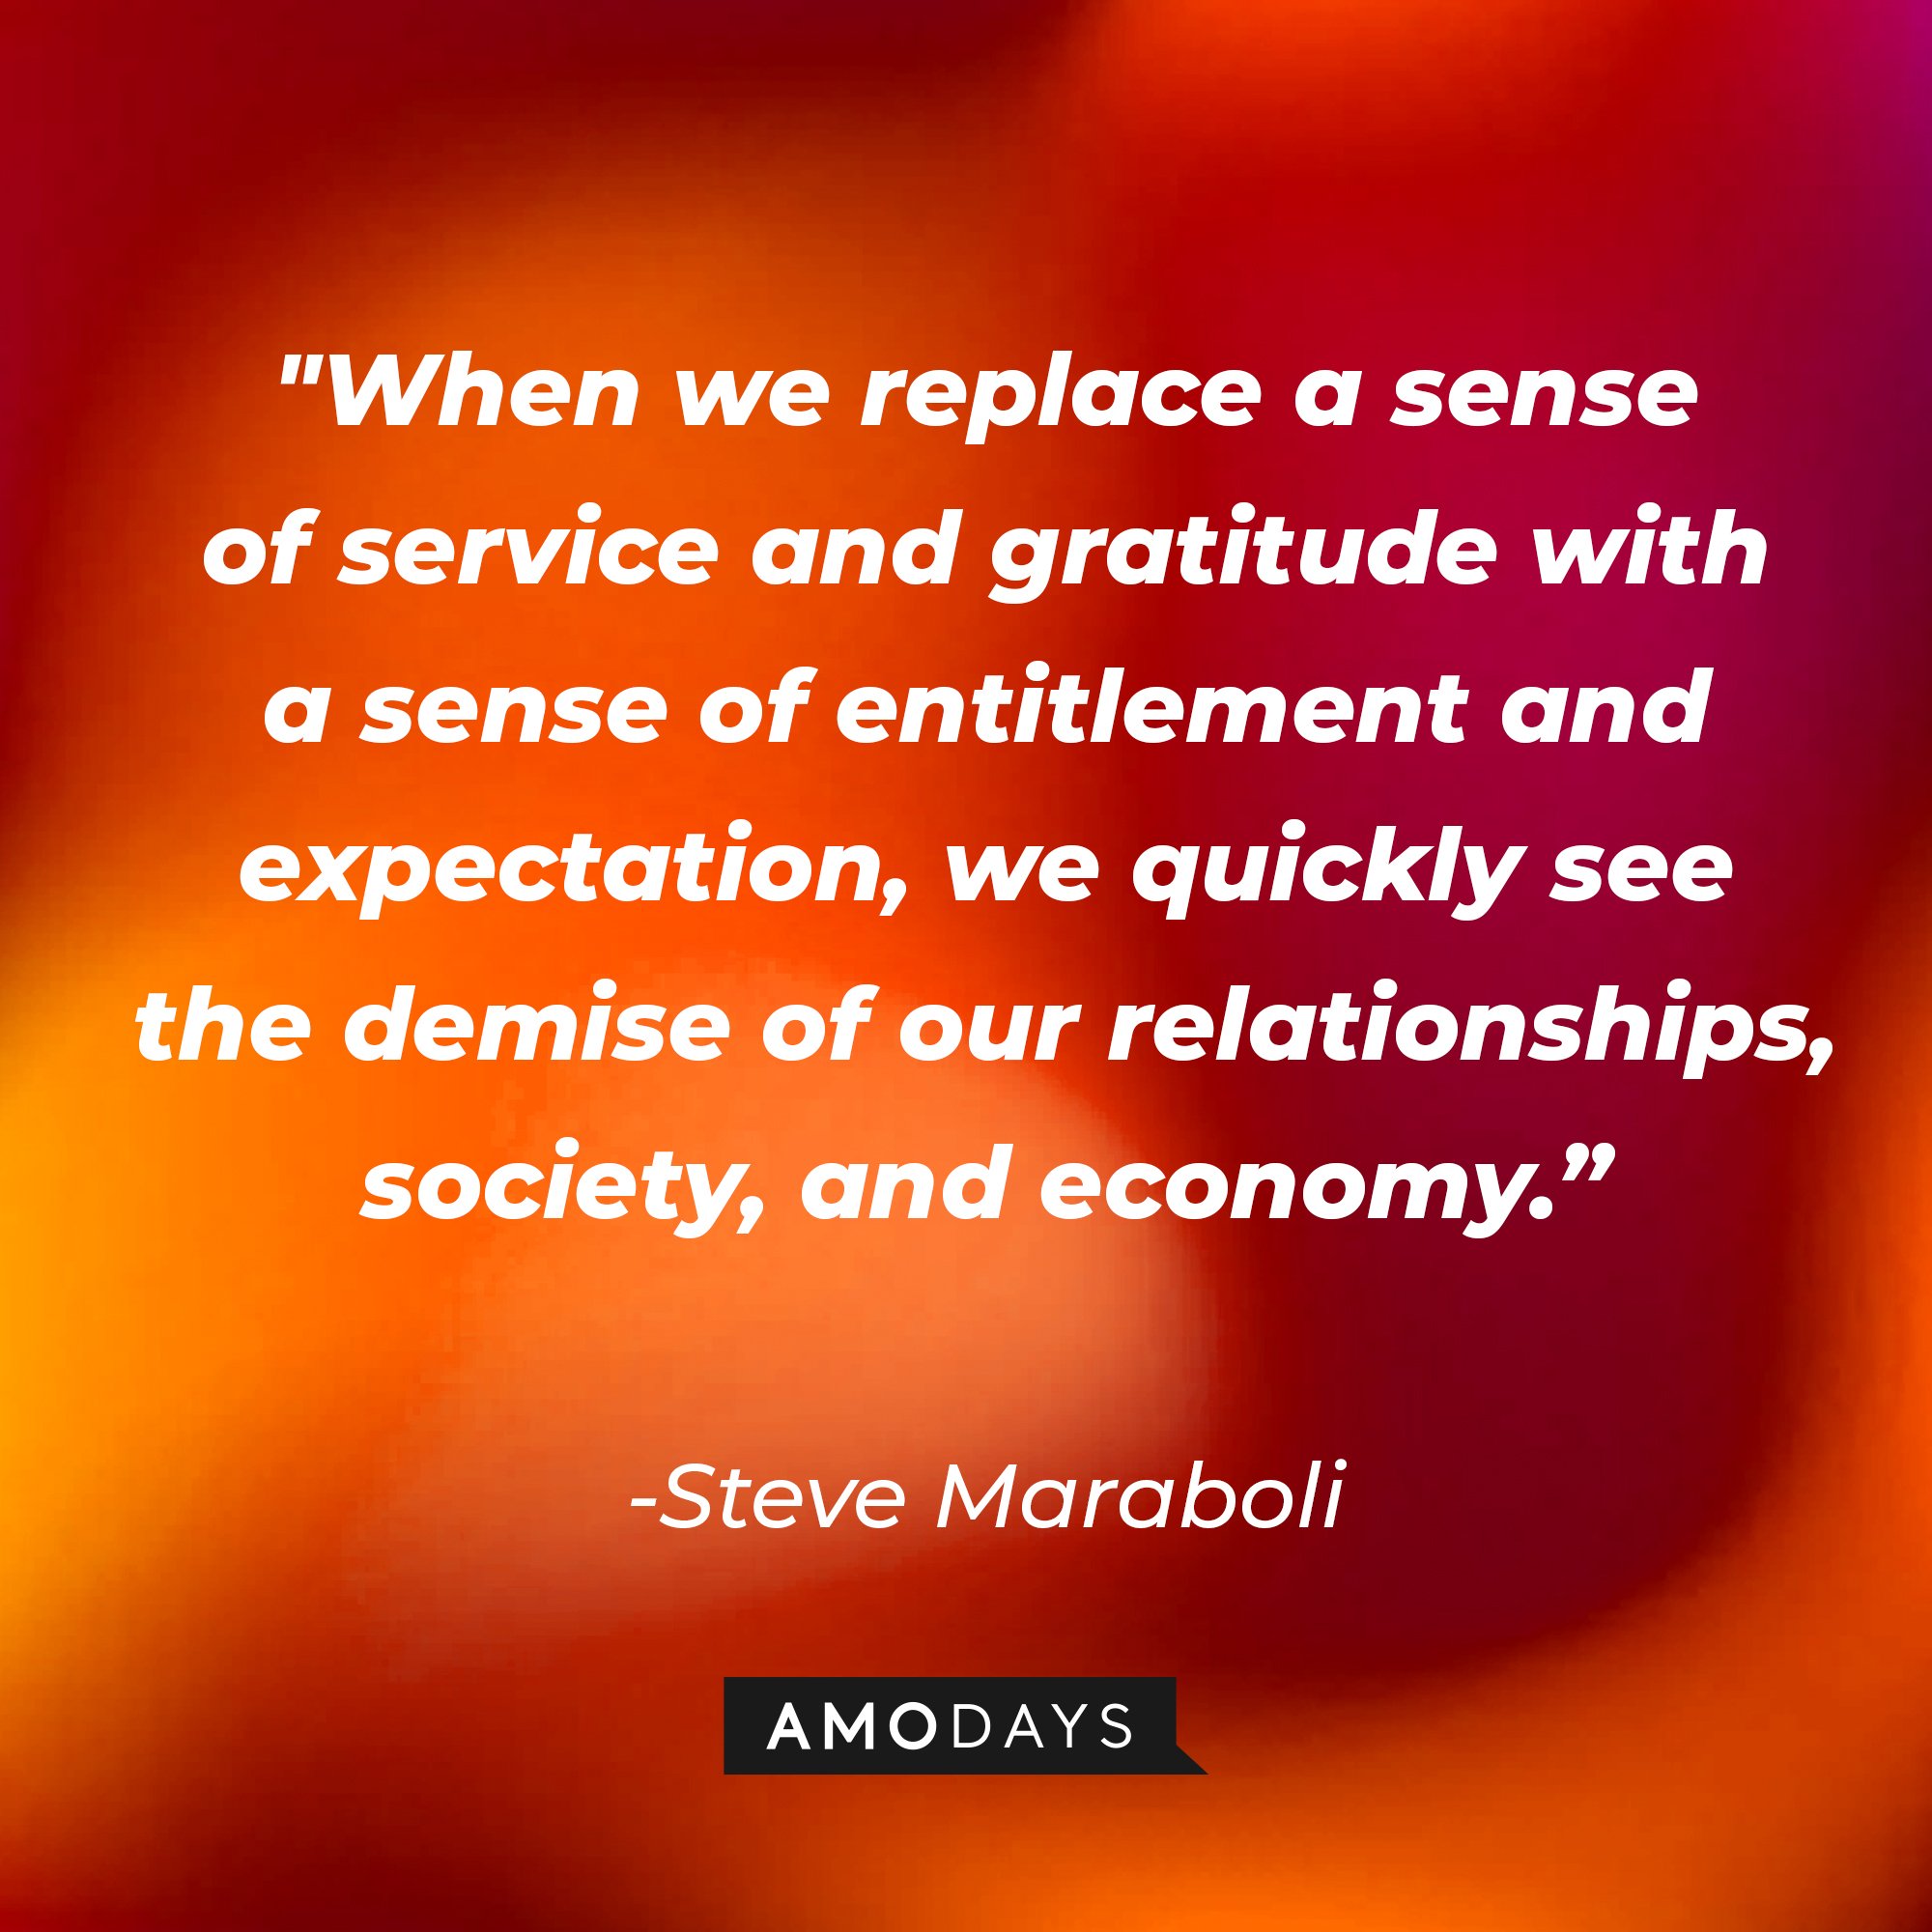 Steve Maraboli’s quote: "When we replace a sense of service and gratitude with a sense of entitlement and expectation, we quickly see the demise of our relationships, society, and economy." | Image: AmoDays